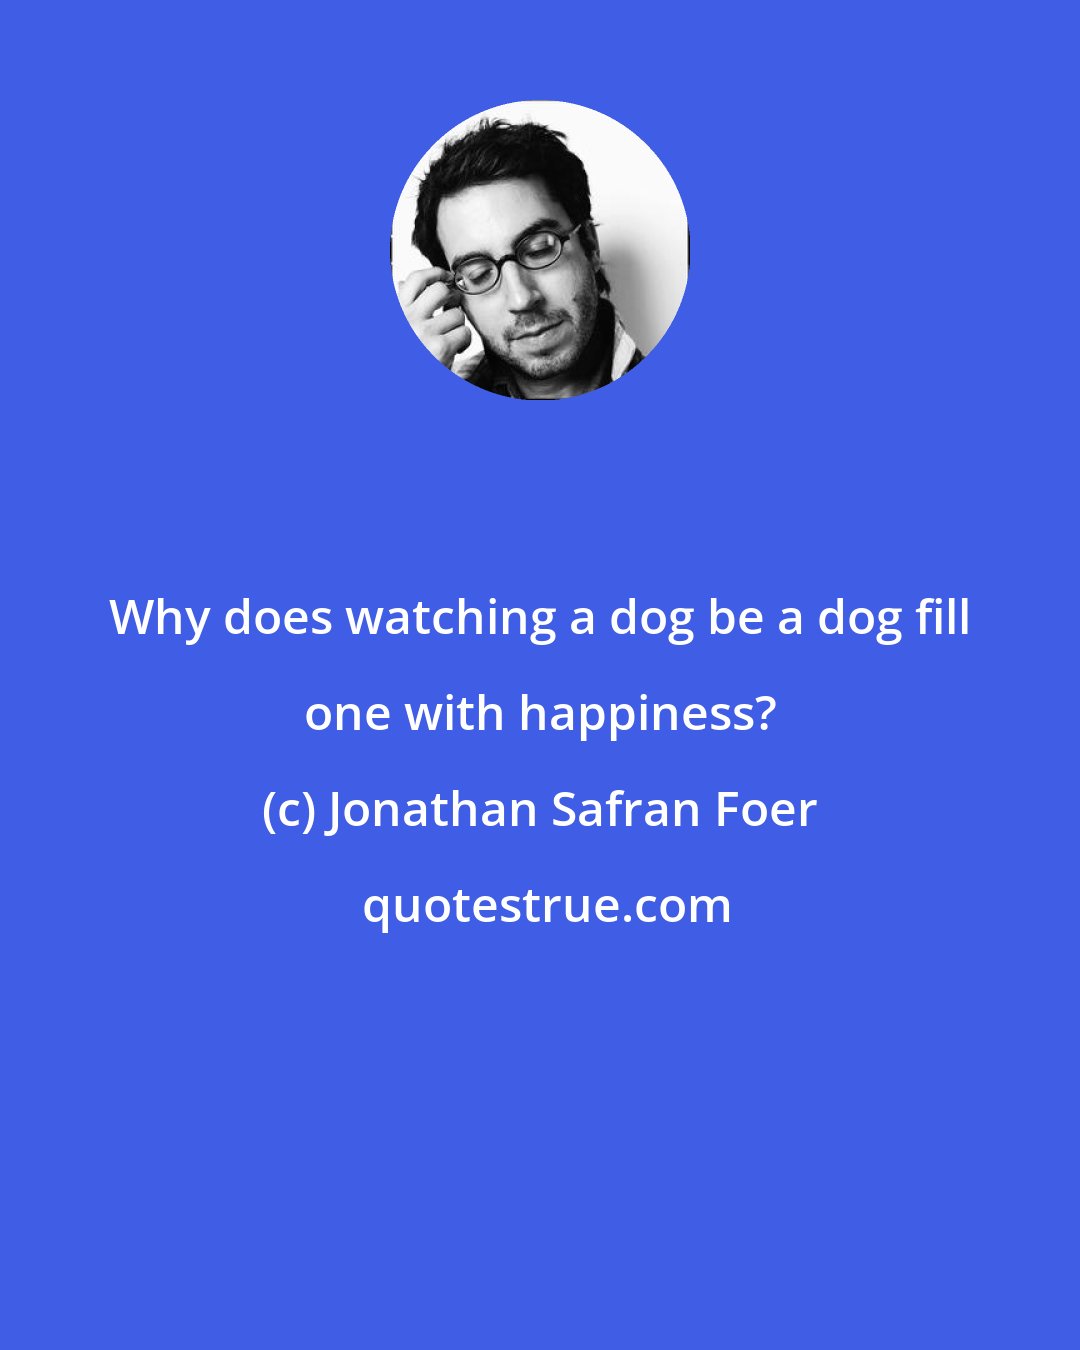 Jonathan Safran Foer: Why does watching a dog be a dog fill one with happiness?